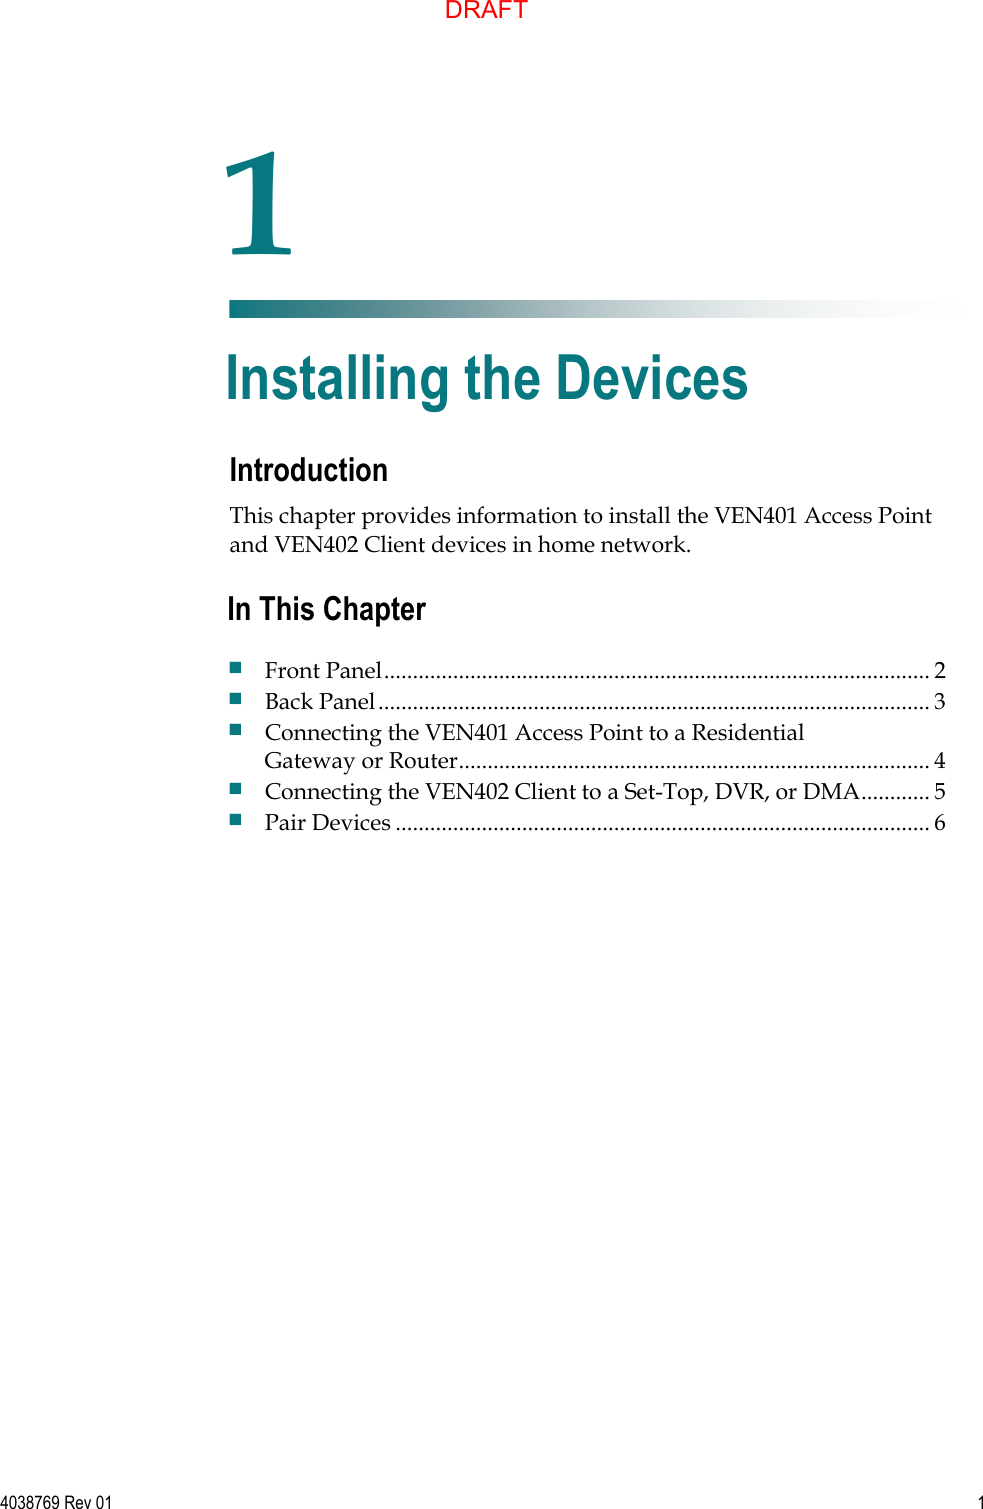   4038769 Rev 01  1  Introduction This chapter provides information to install the VEN401 Access Point and VEN402 Client devices in home network.    1 Chapter 1 Installing the Devices In This Chapter  Front Panel ............................................................................................... 2  Back Panel ................................................................................................ 3  Connecting the VEN401 Access Point to a Residential Gateway or Router .................................................................................. 4  Connecting the VEN402 Client to a Set-Top, DVR, or DMA ............ 5  Pair Devices ............................................................................................. 6 DRAFT